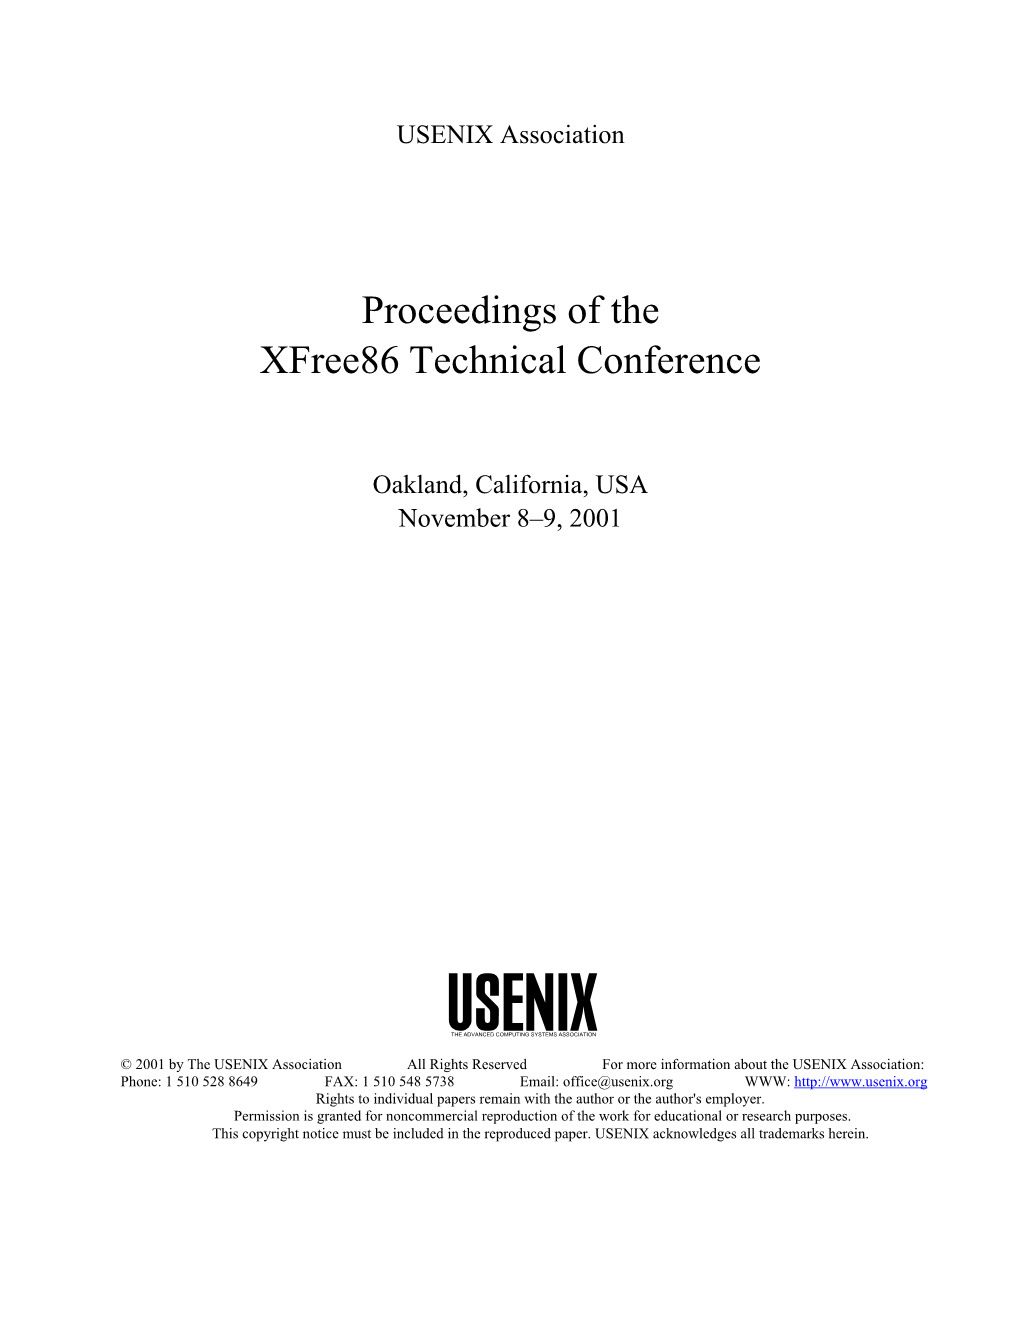 Proceedings of the Xfree86 Technical Conference